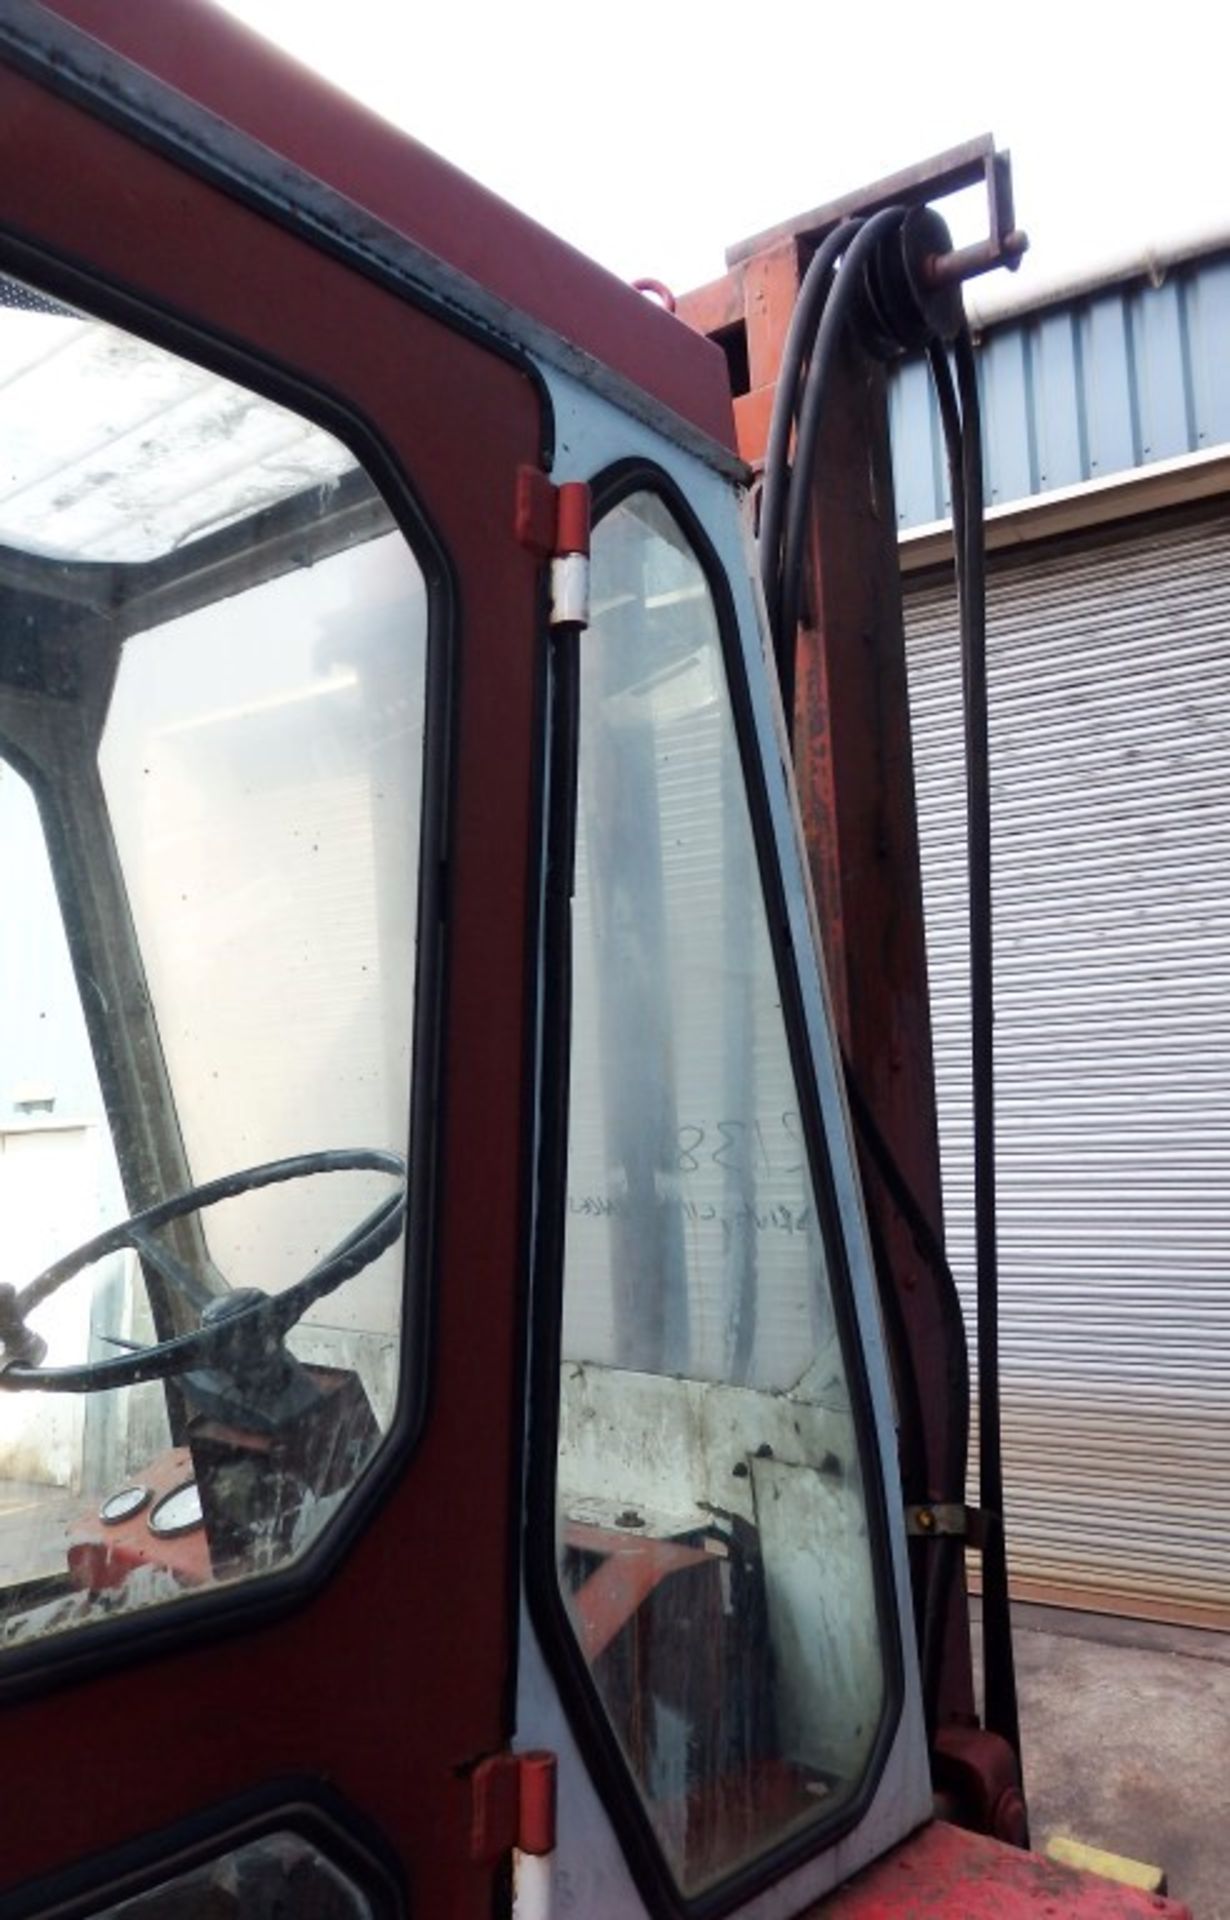 1 x Manitou Heavy Duty Rough Terrain Diesel Forklift Truck - 4444hrs - Exhaust Requires - Image 3 of 30